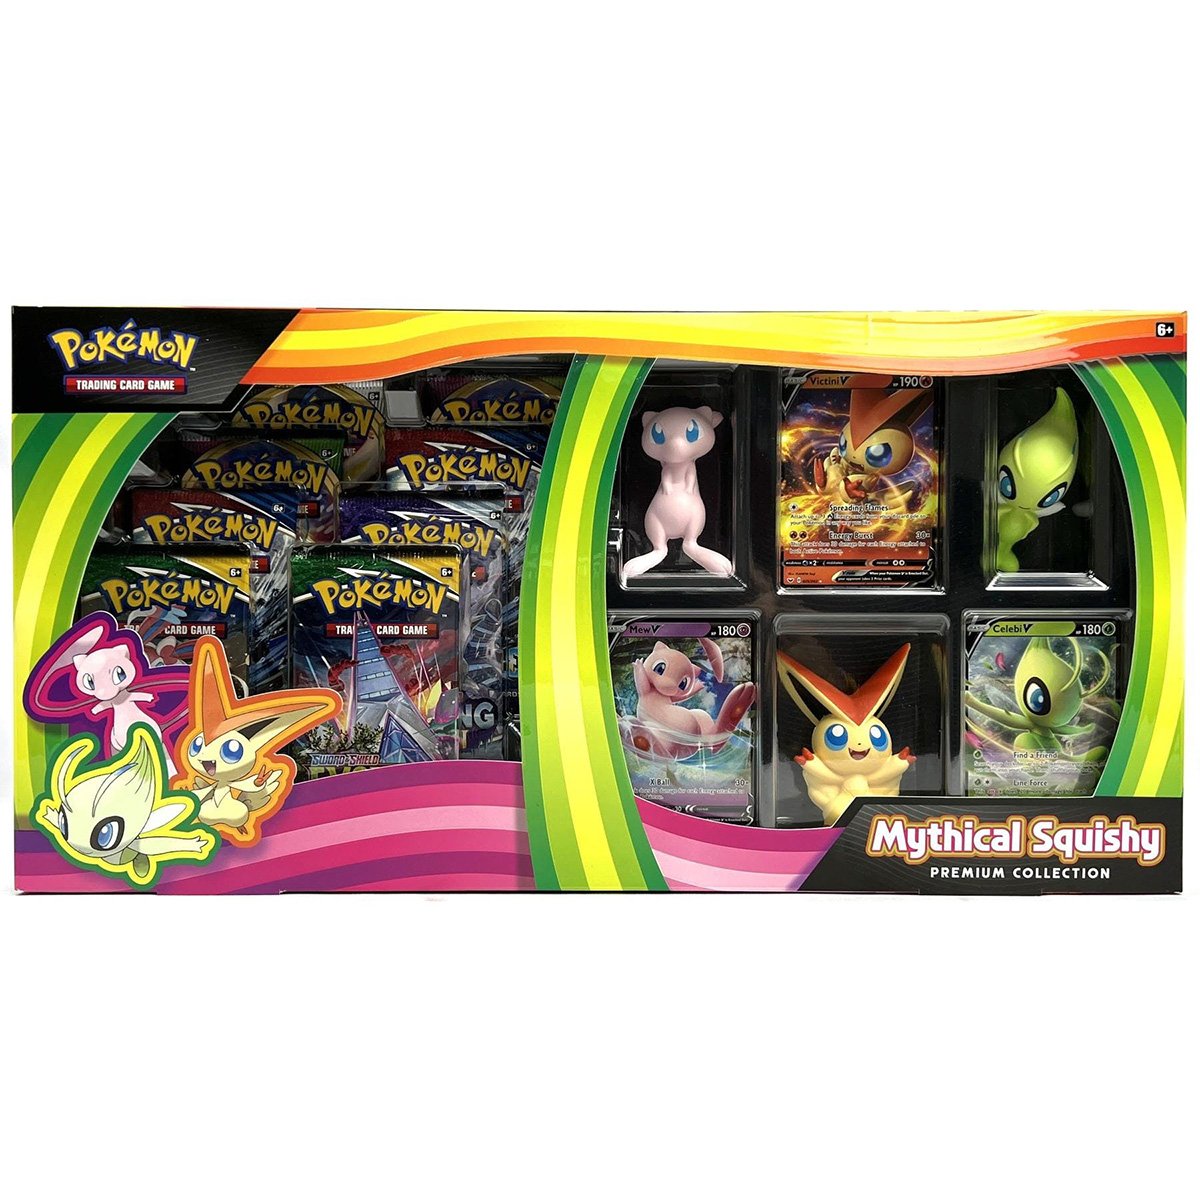 Pokemon TCG: Mythical Squishy Premium Collection-The Pokémon Company International-Ace Cards &amp; Collectibles